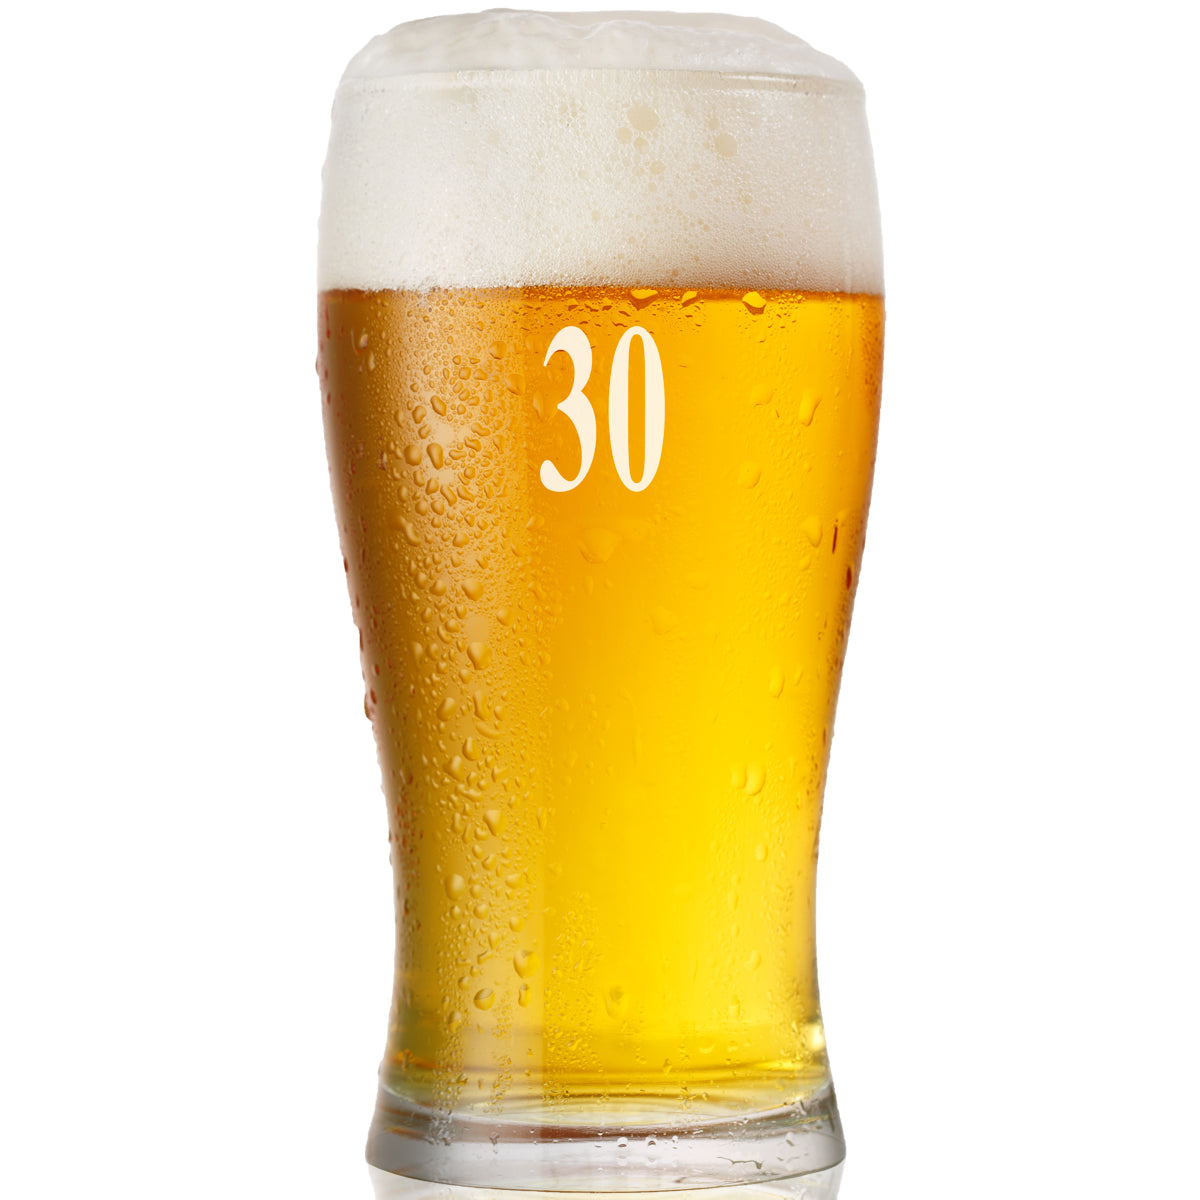 Engraved Personalised 30th Birthday Signature Pint Beer Glass Gift Boxed